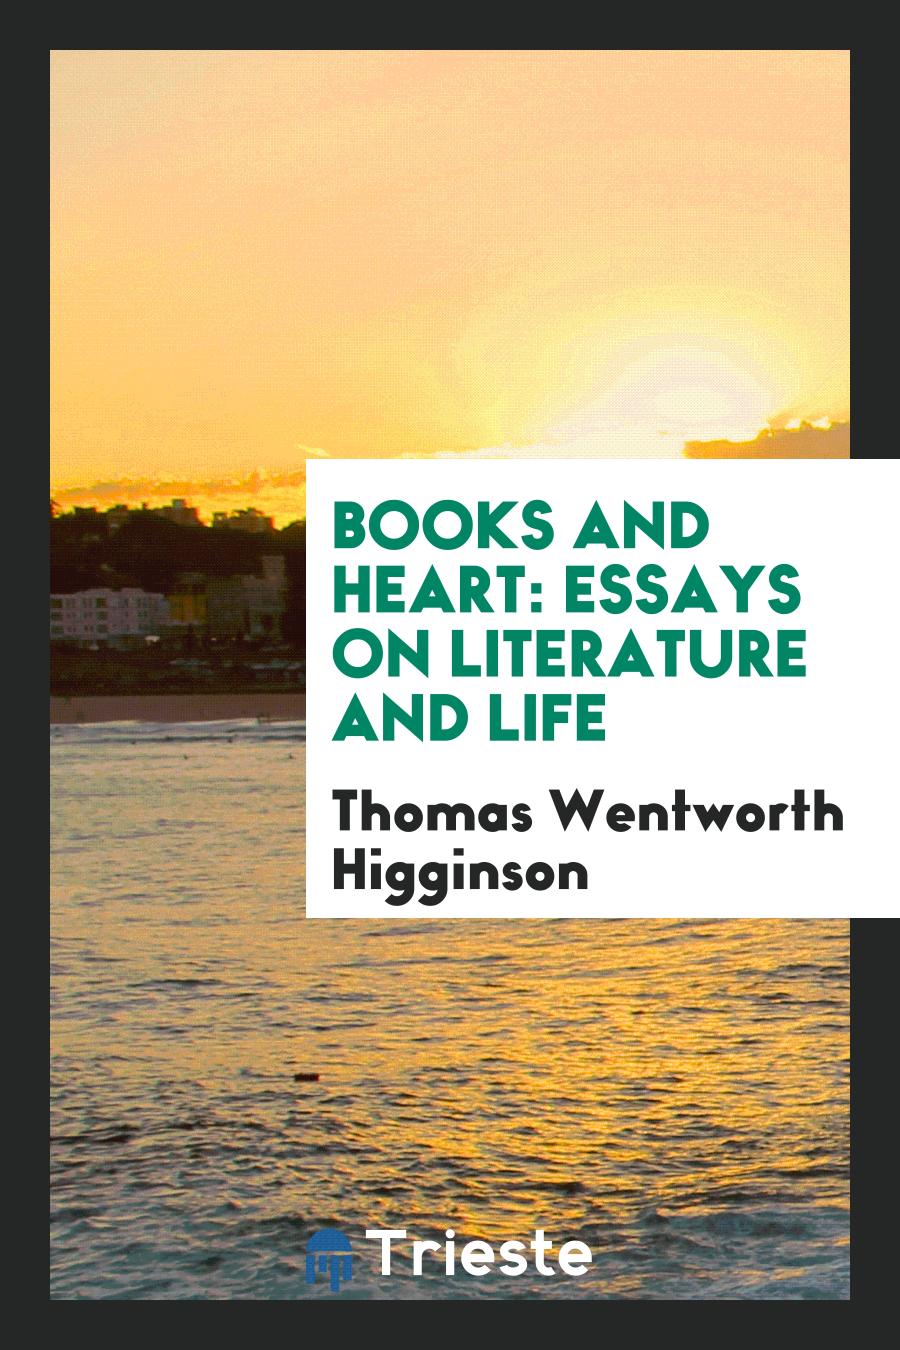 Books and Heart: Essays on Literature and Life